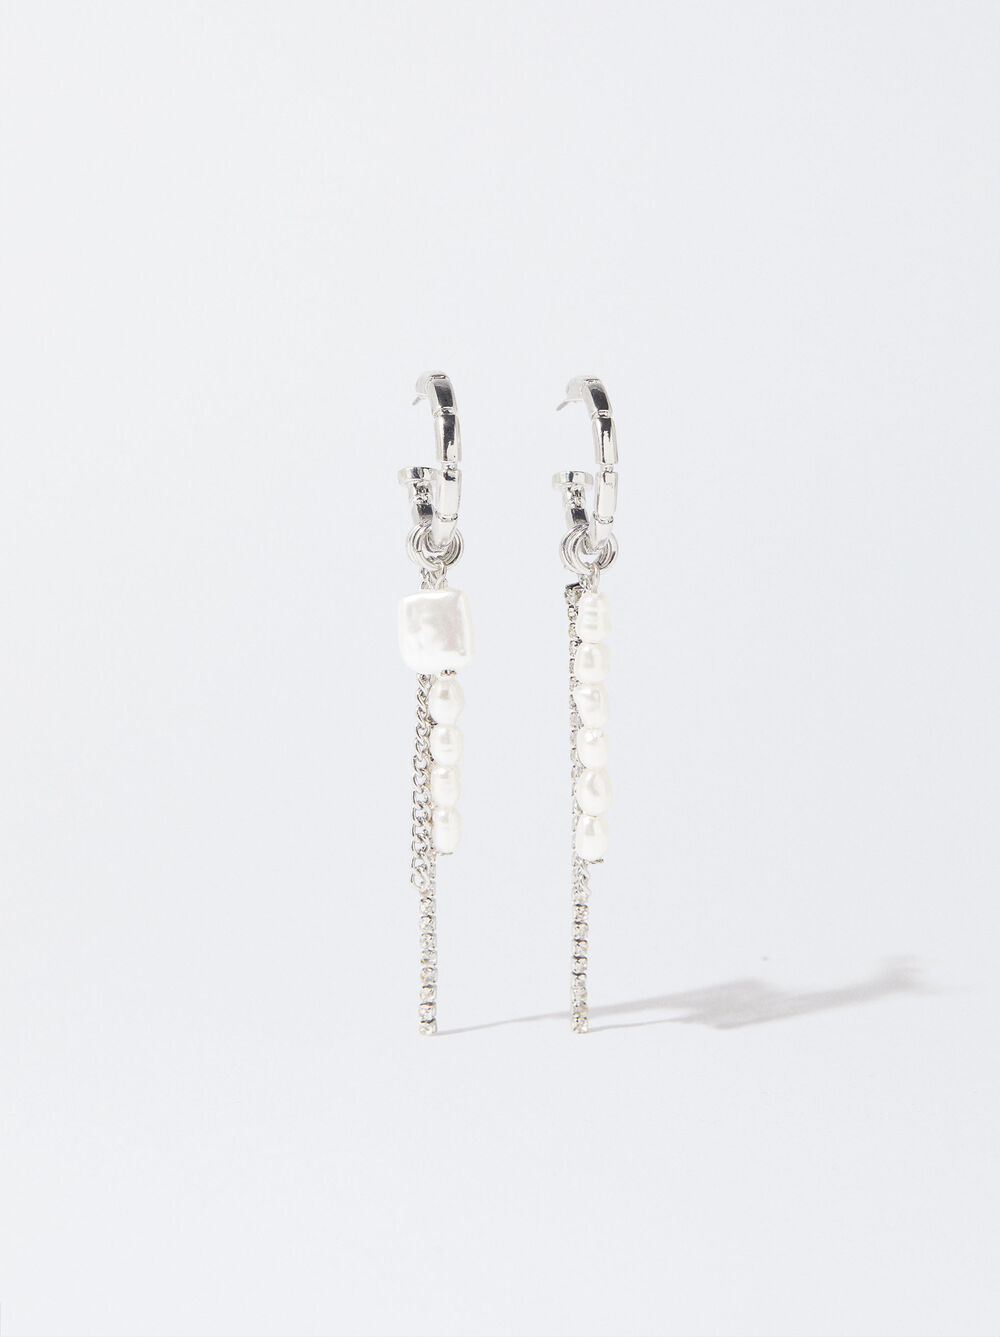 Silver Earrings With Crystals